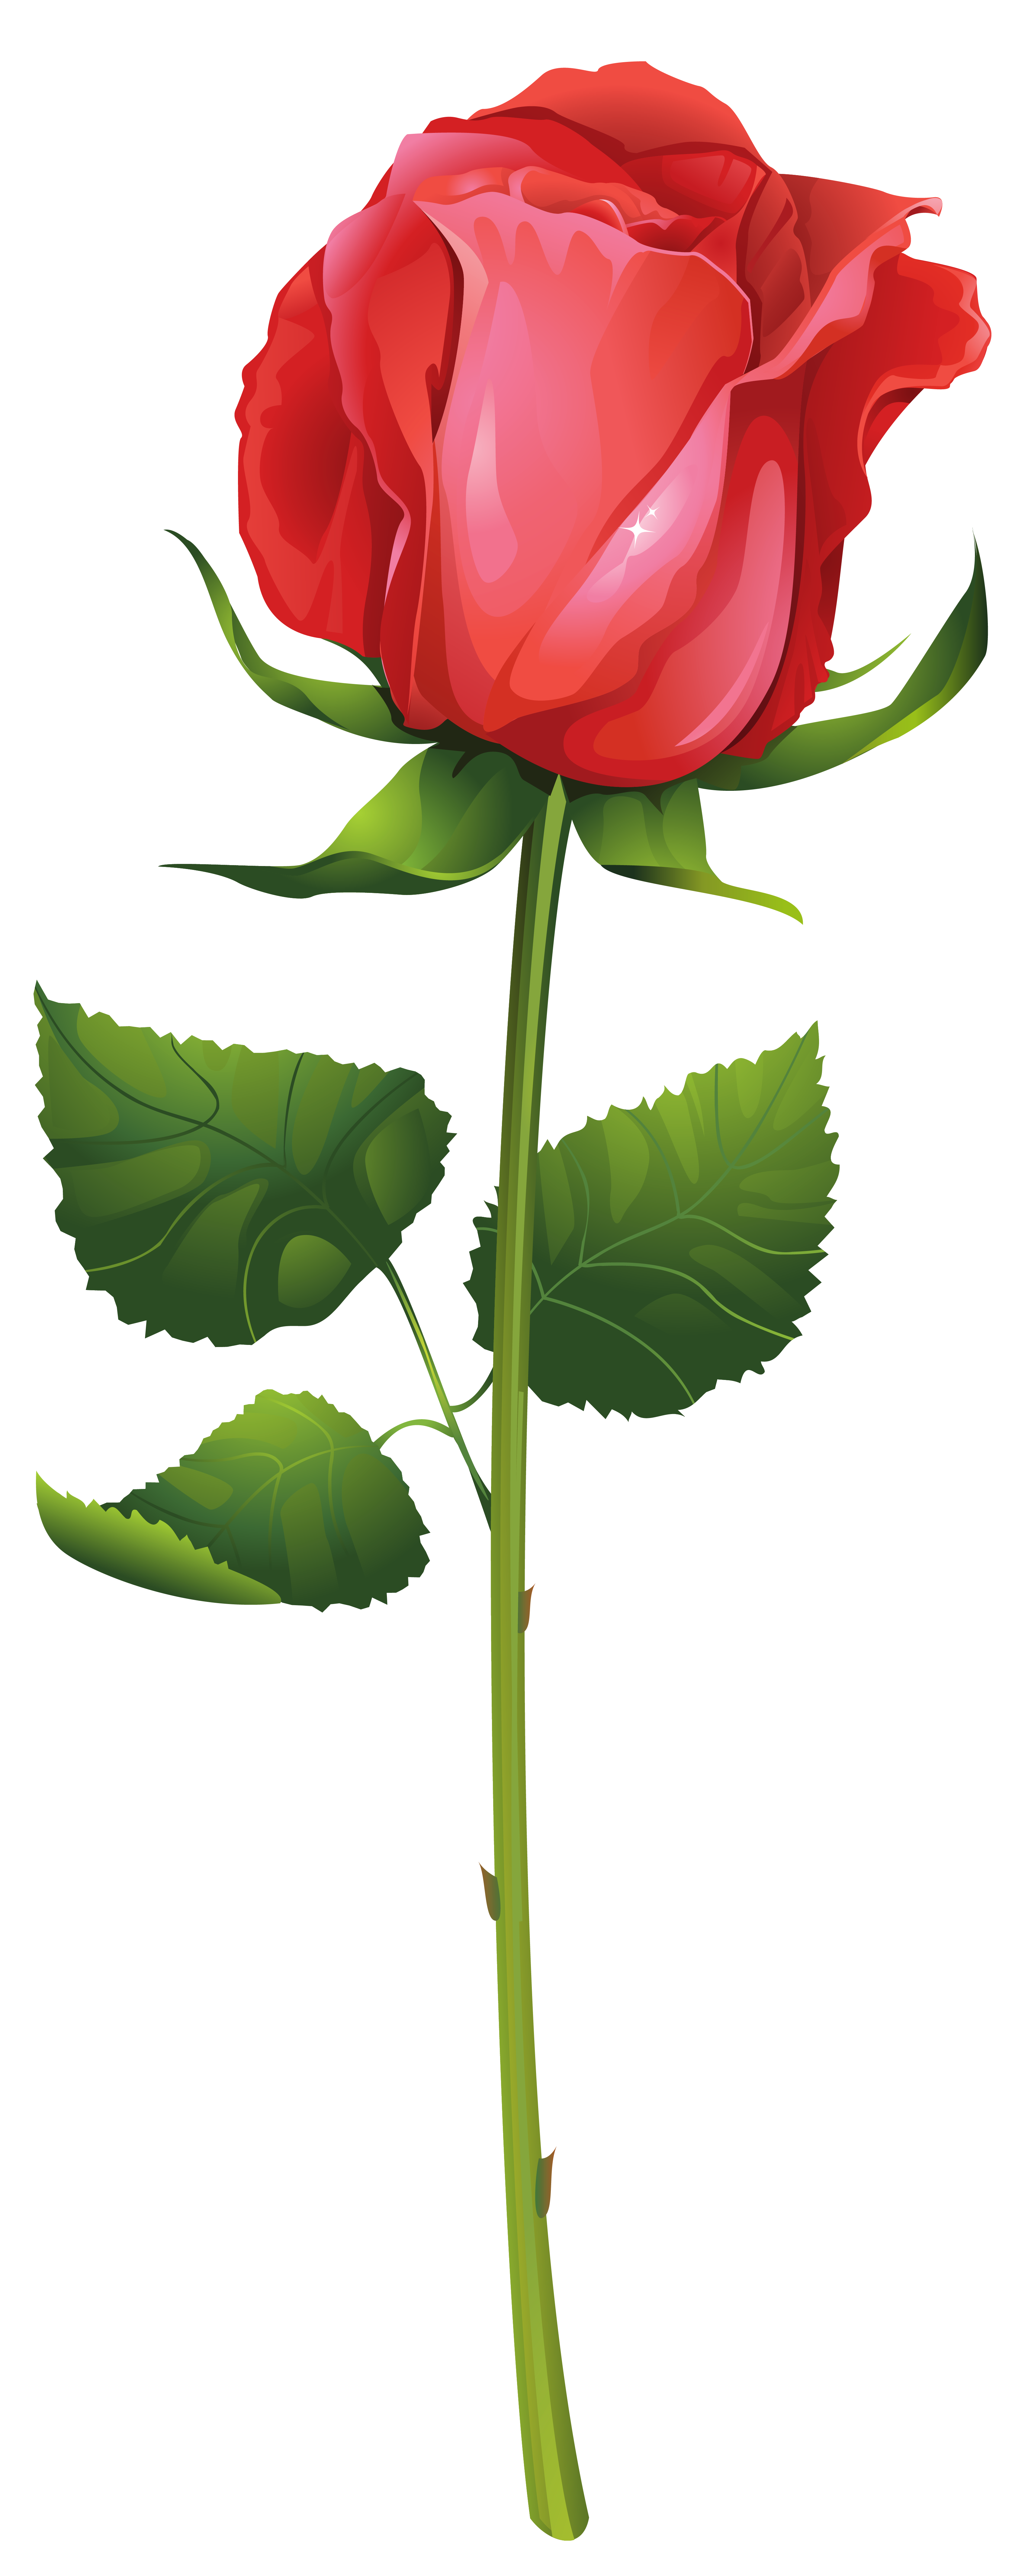 rose with stem and leaf clipart #40655